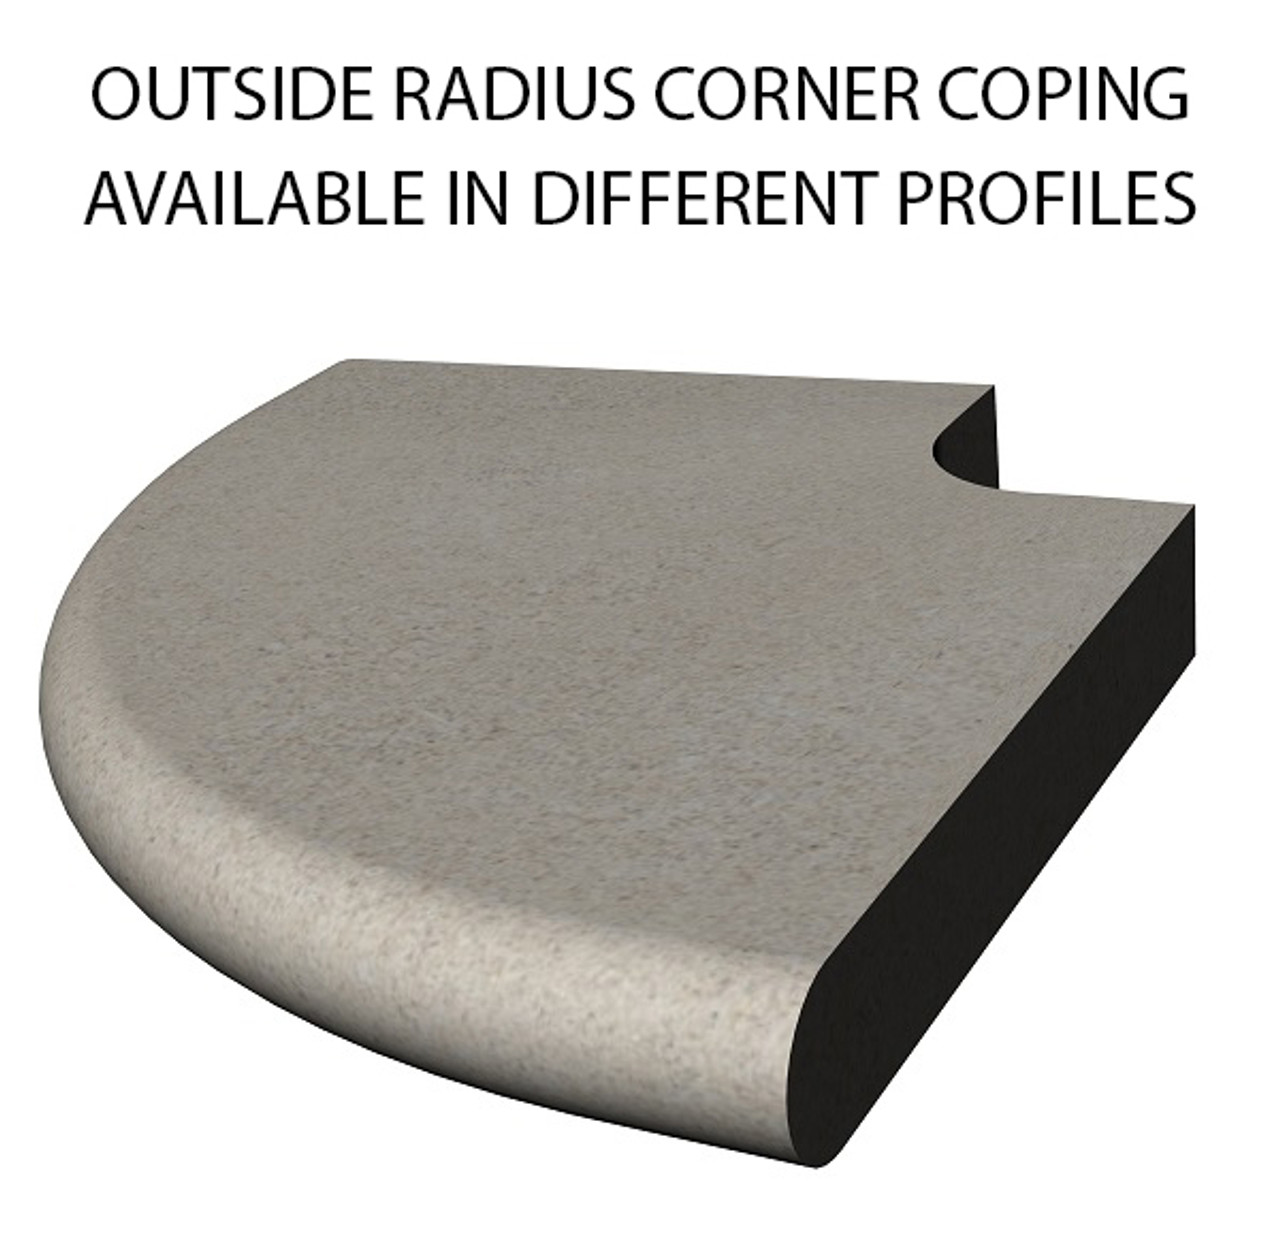 Example of limestone outside radius corner swimming pool or spa coping with bull nose edge. Available in limestone, bluestone, sandstone, granite, marble, travertine, made in USA, shipped nationwide.